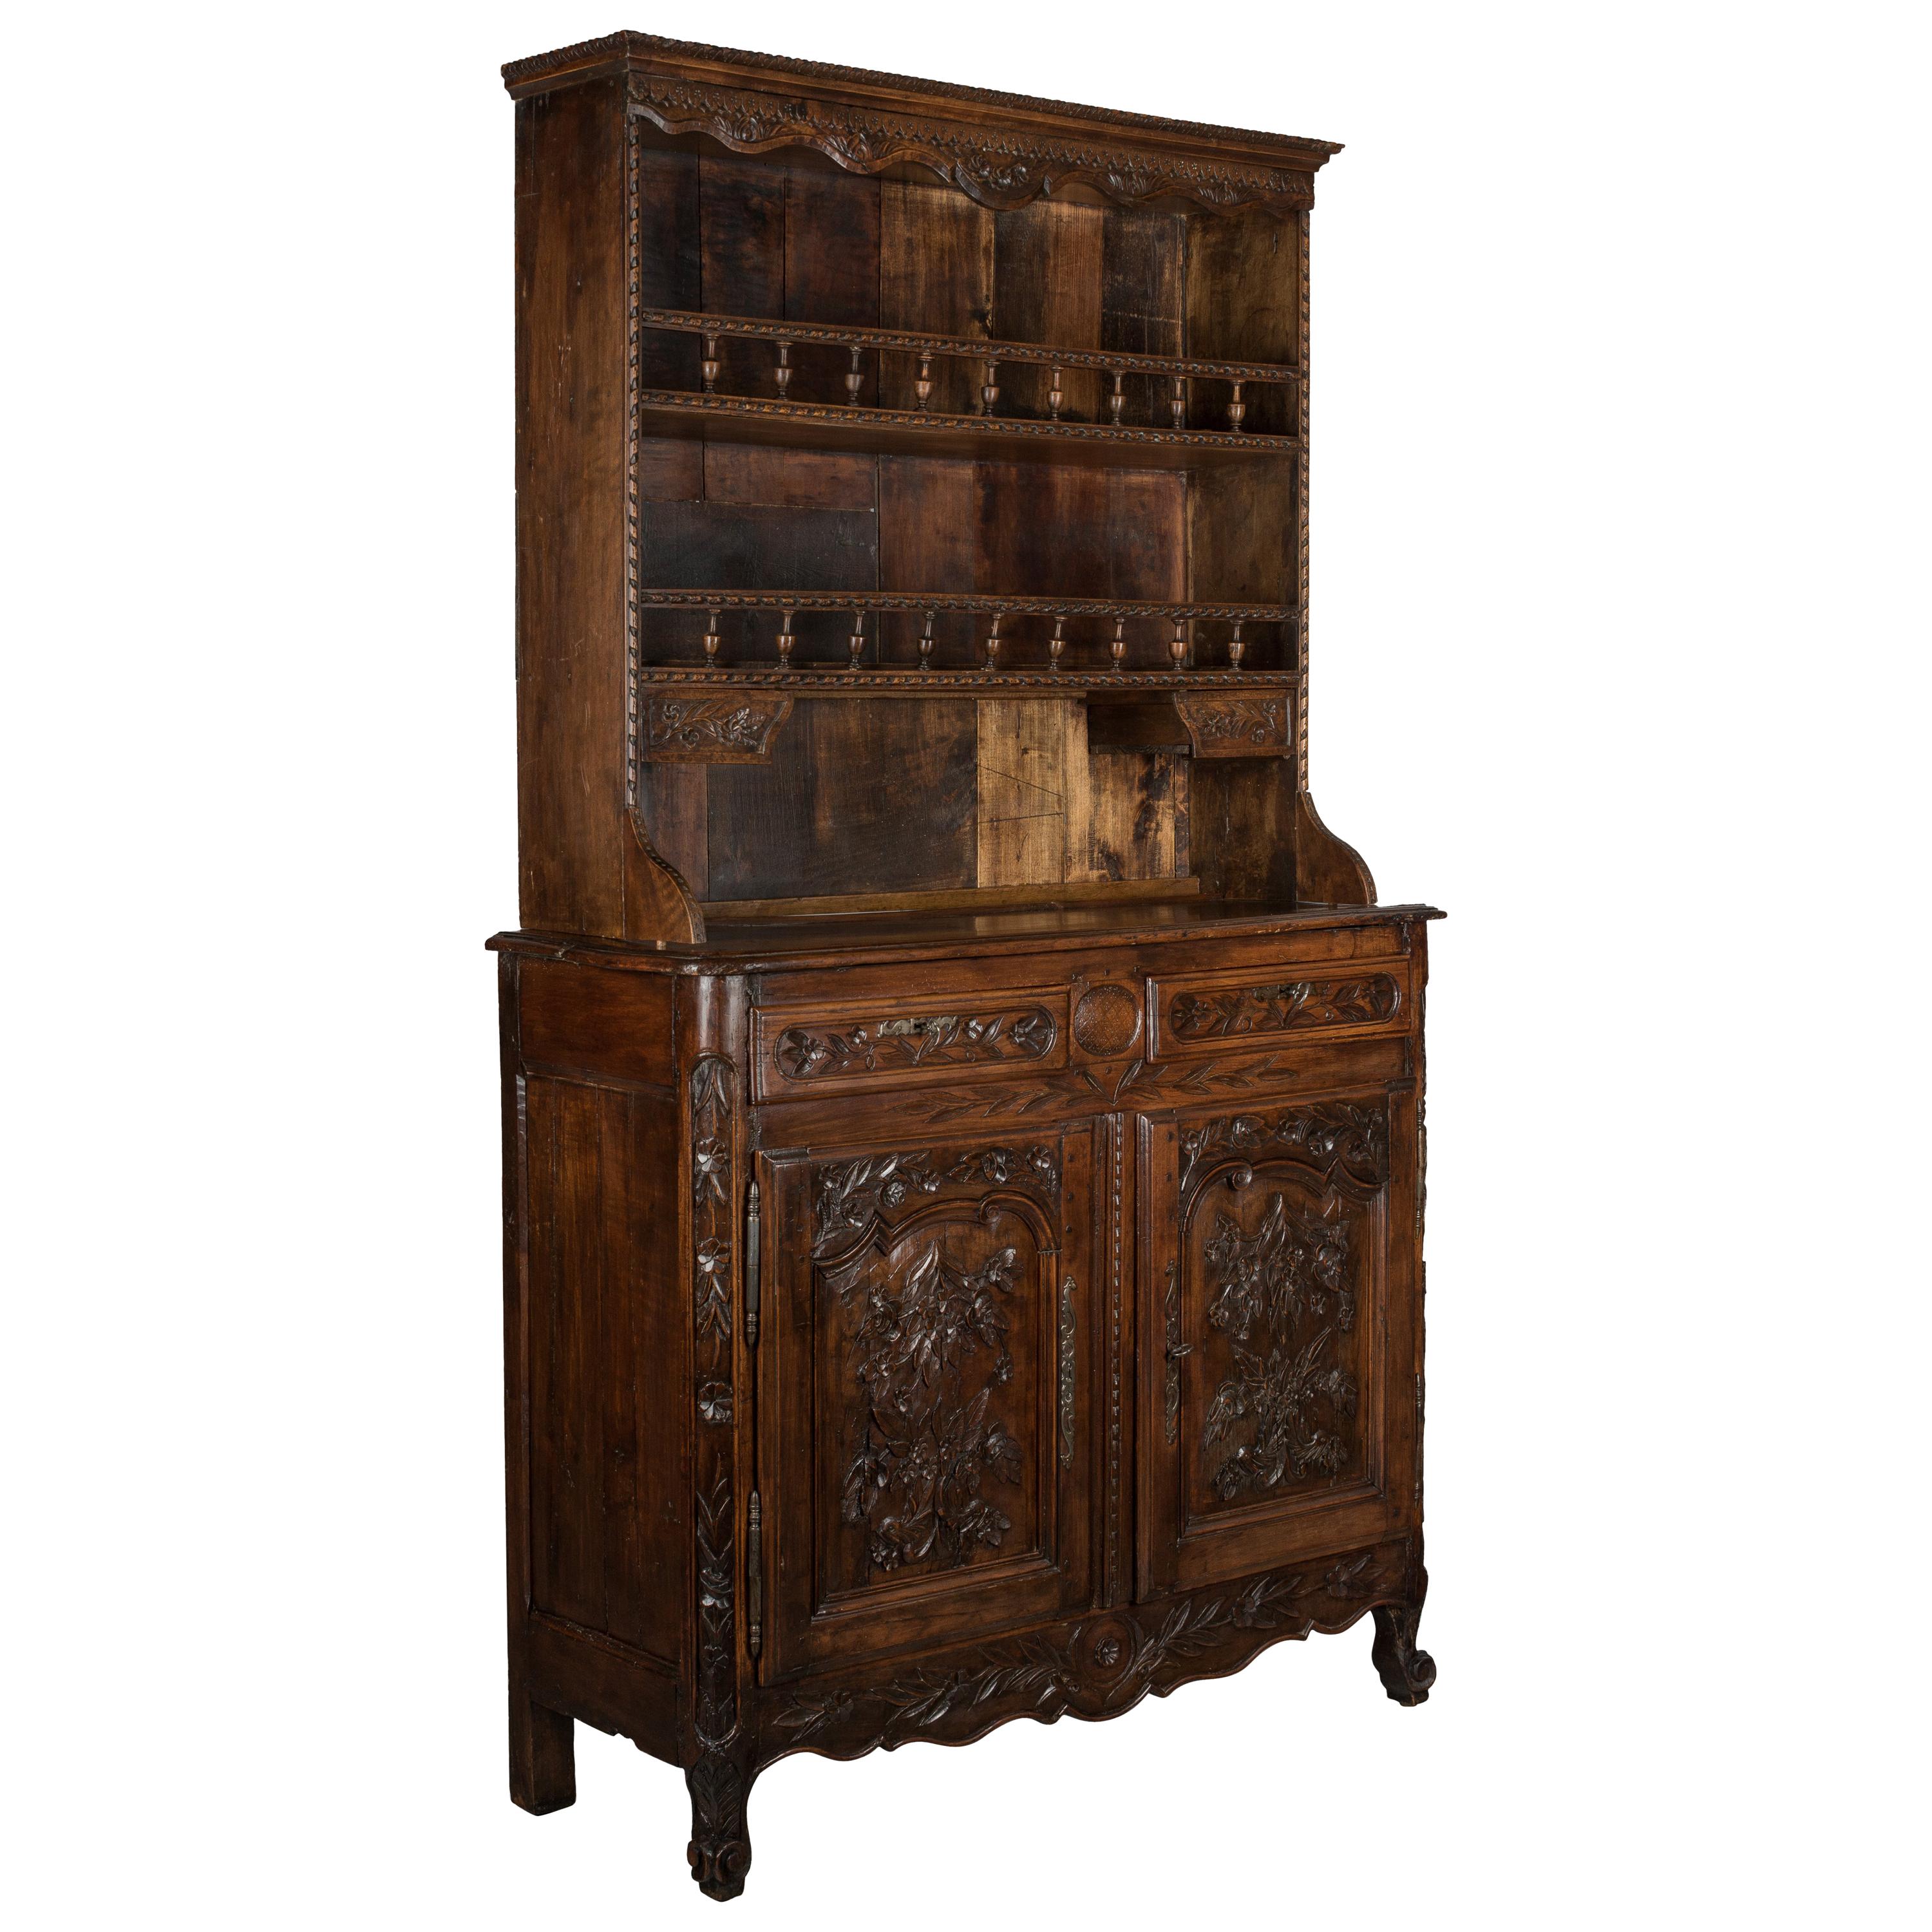 18th Century Brittany Vaisselier or Hutch